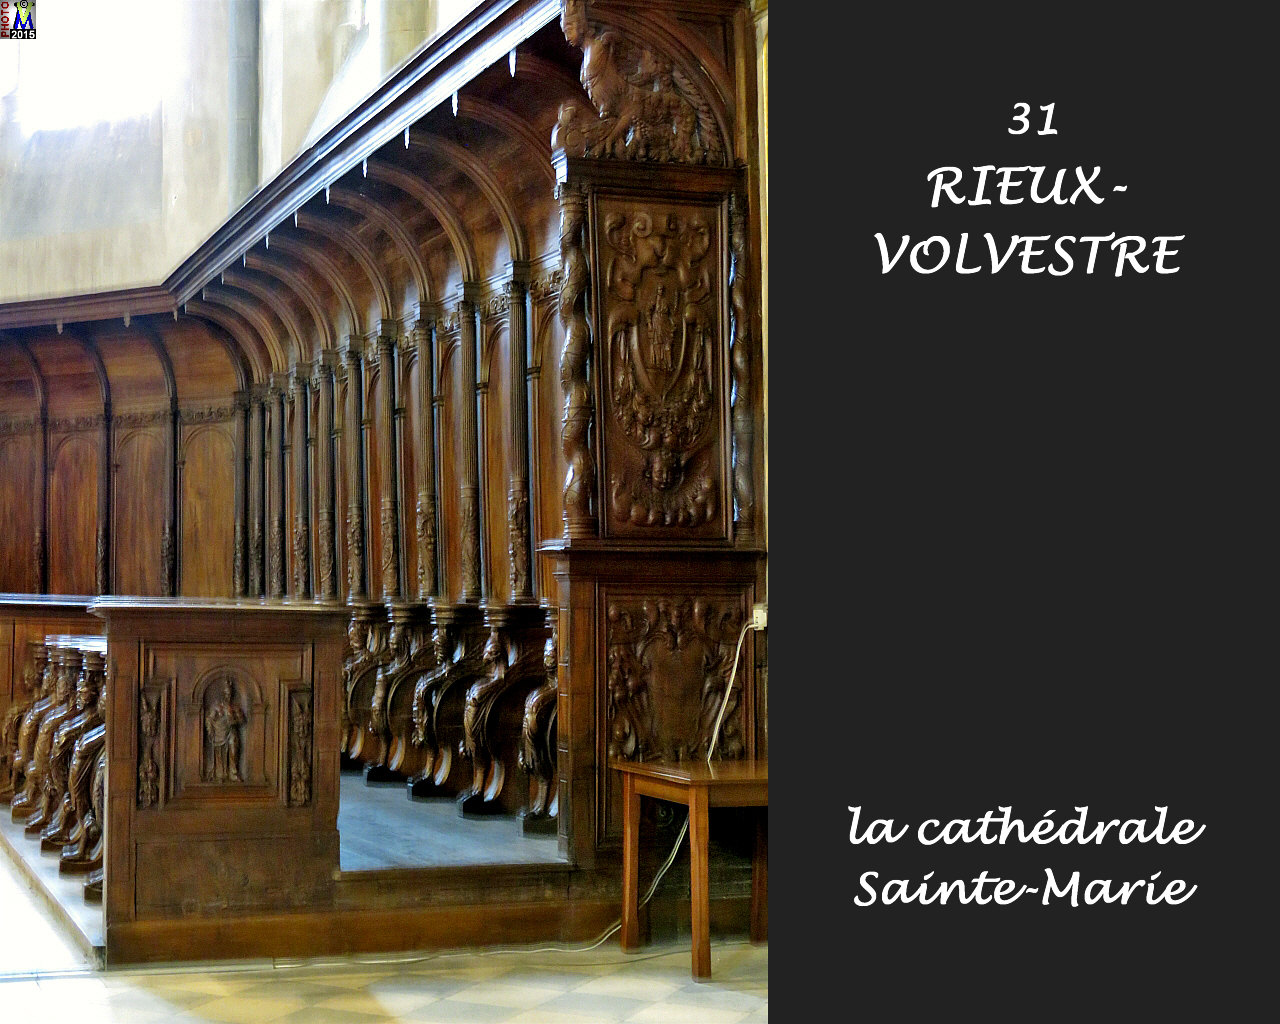 31RIEUX-VOLVESTRE_cathedrale_246.jpg